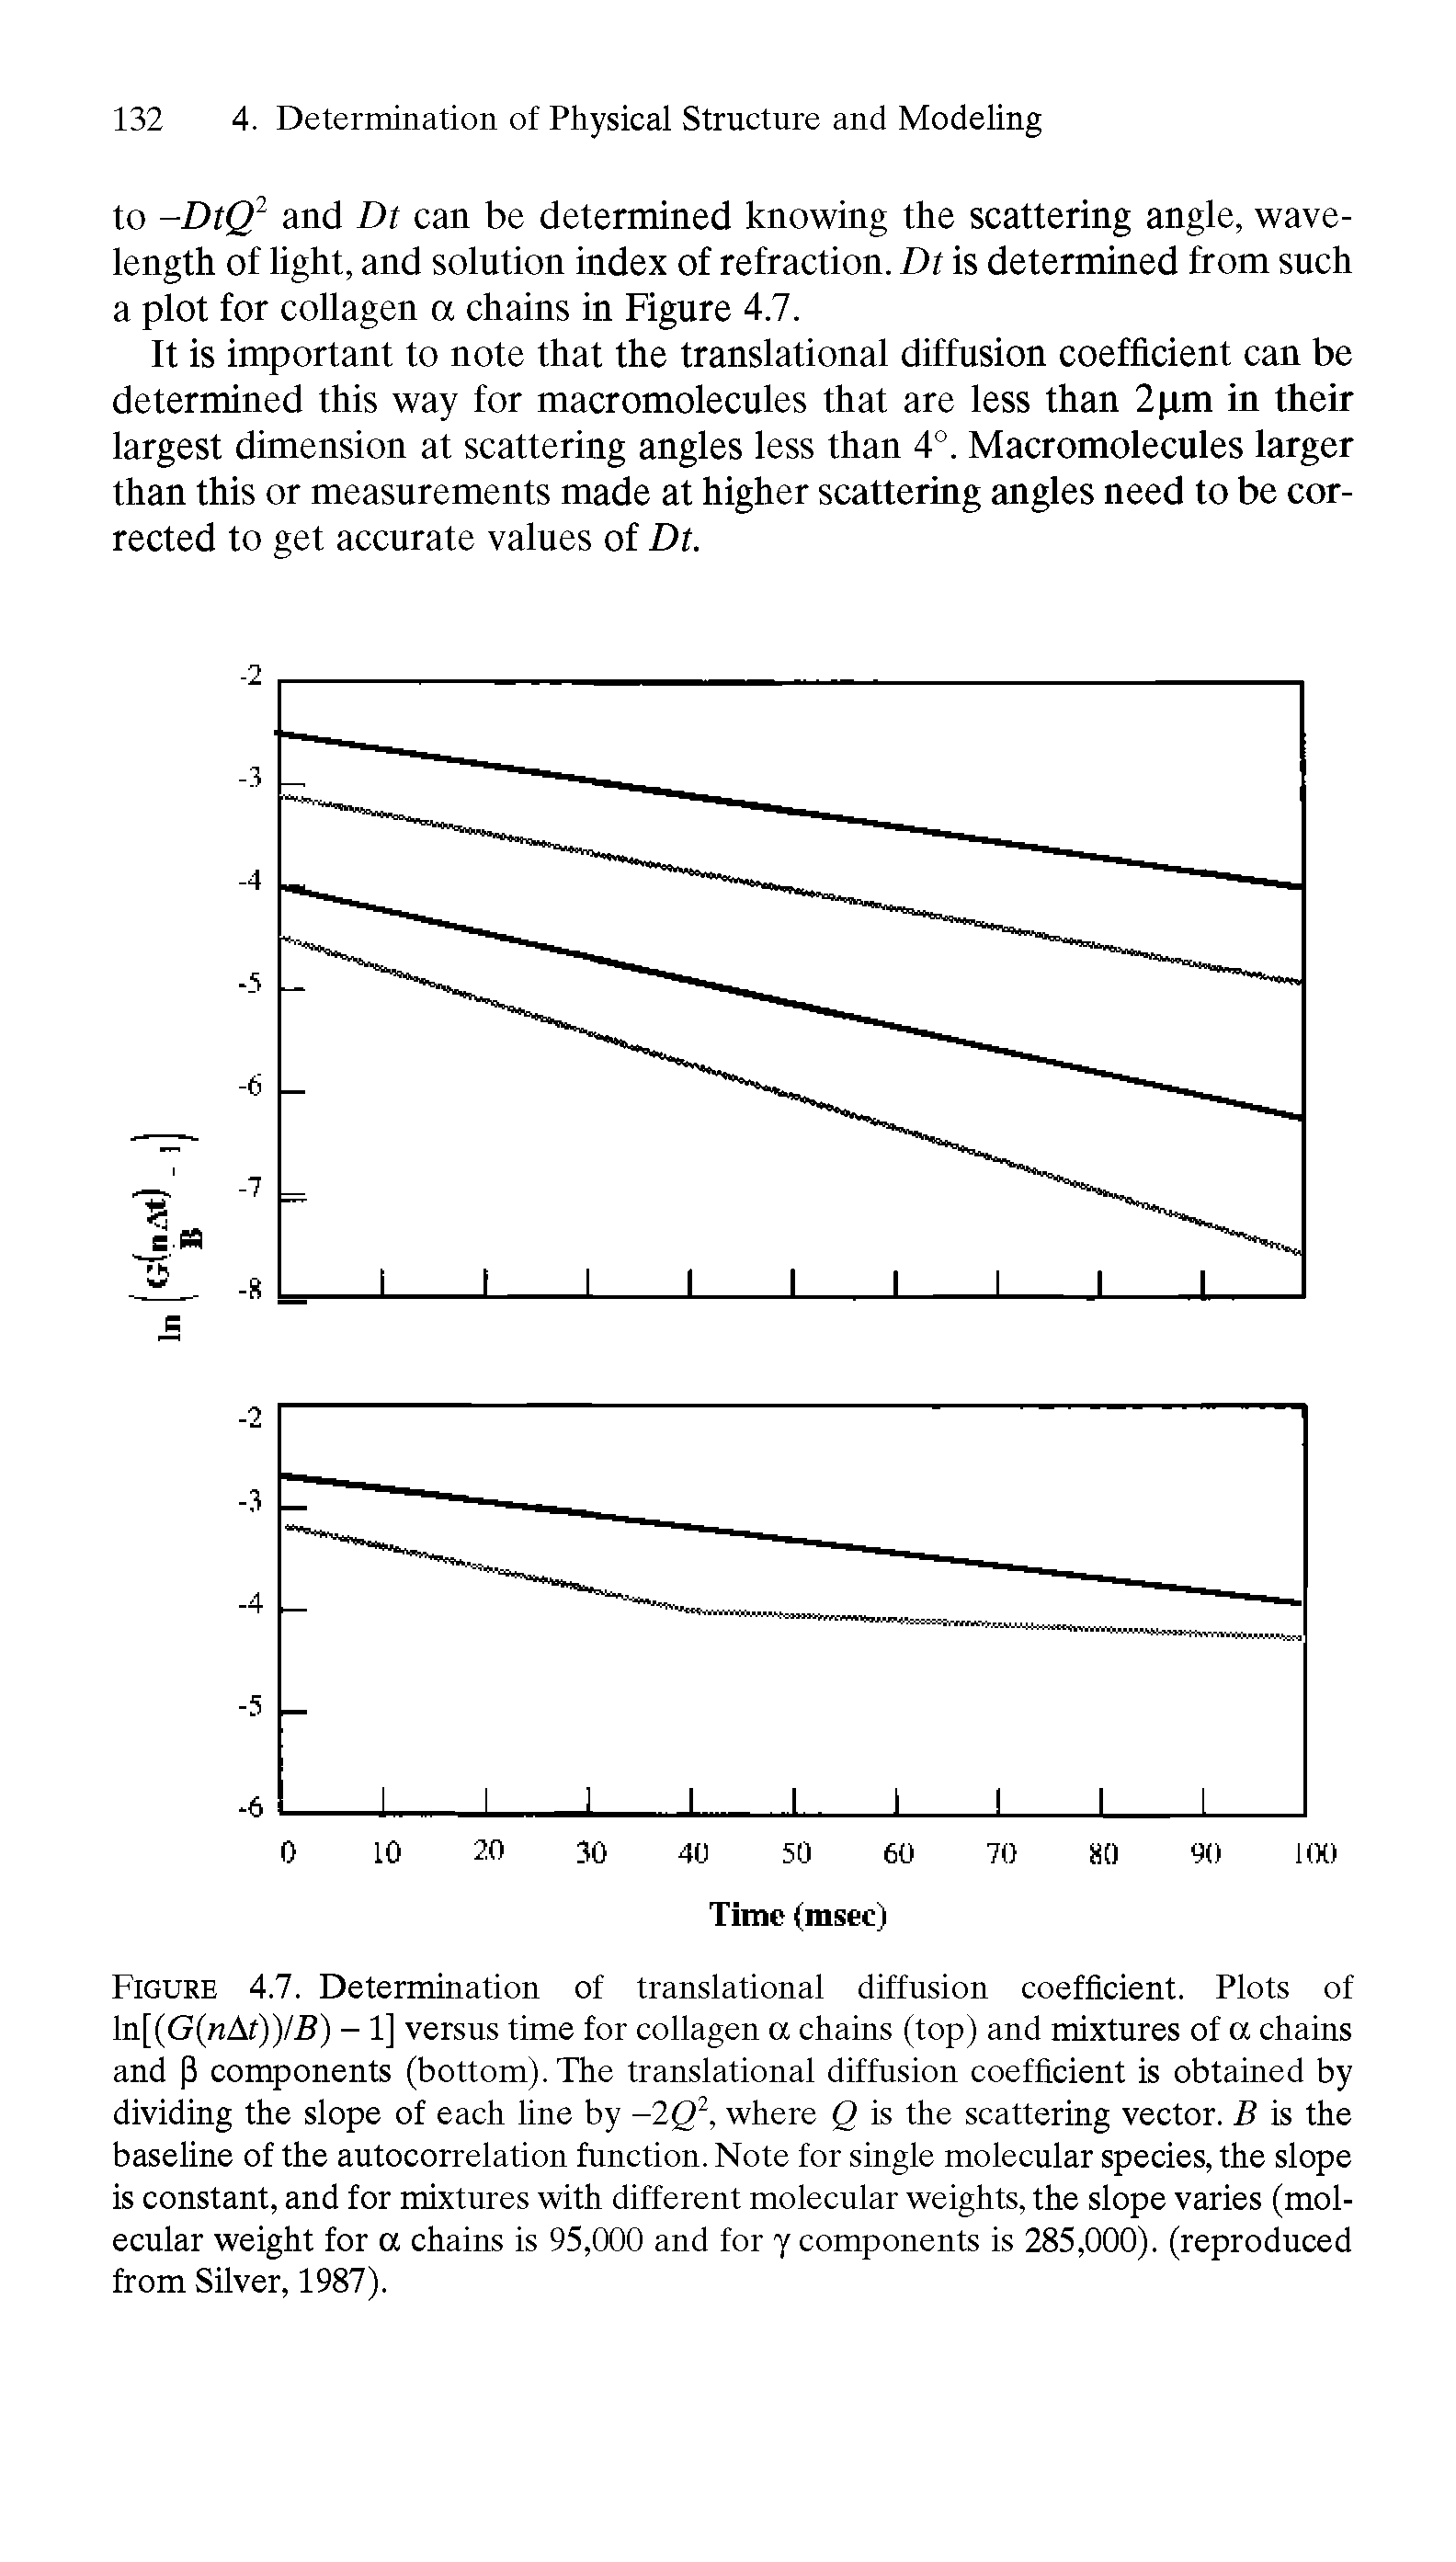 Figure 4.7. Determination of translational diffusion coefficient. Plots of ln[(G(nAf))/B) - 1] versus time for collagen a chains (top) and mixtures of a chains and P components (bottom). The translational diffusion coefficient is obtained by dividing the slope of each line by -2Q2, where Q is the scattering vector. B is the baseline of the autocorrelation function. Note for single molecular species, the slope is constant, and for mixtures with different molecular weights, the slope varies (molecular weight for a chains is 95,000 and for y components is 285,000). (reproduced from Silver, 1987).